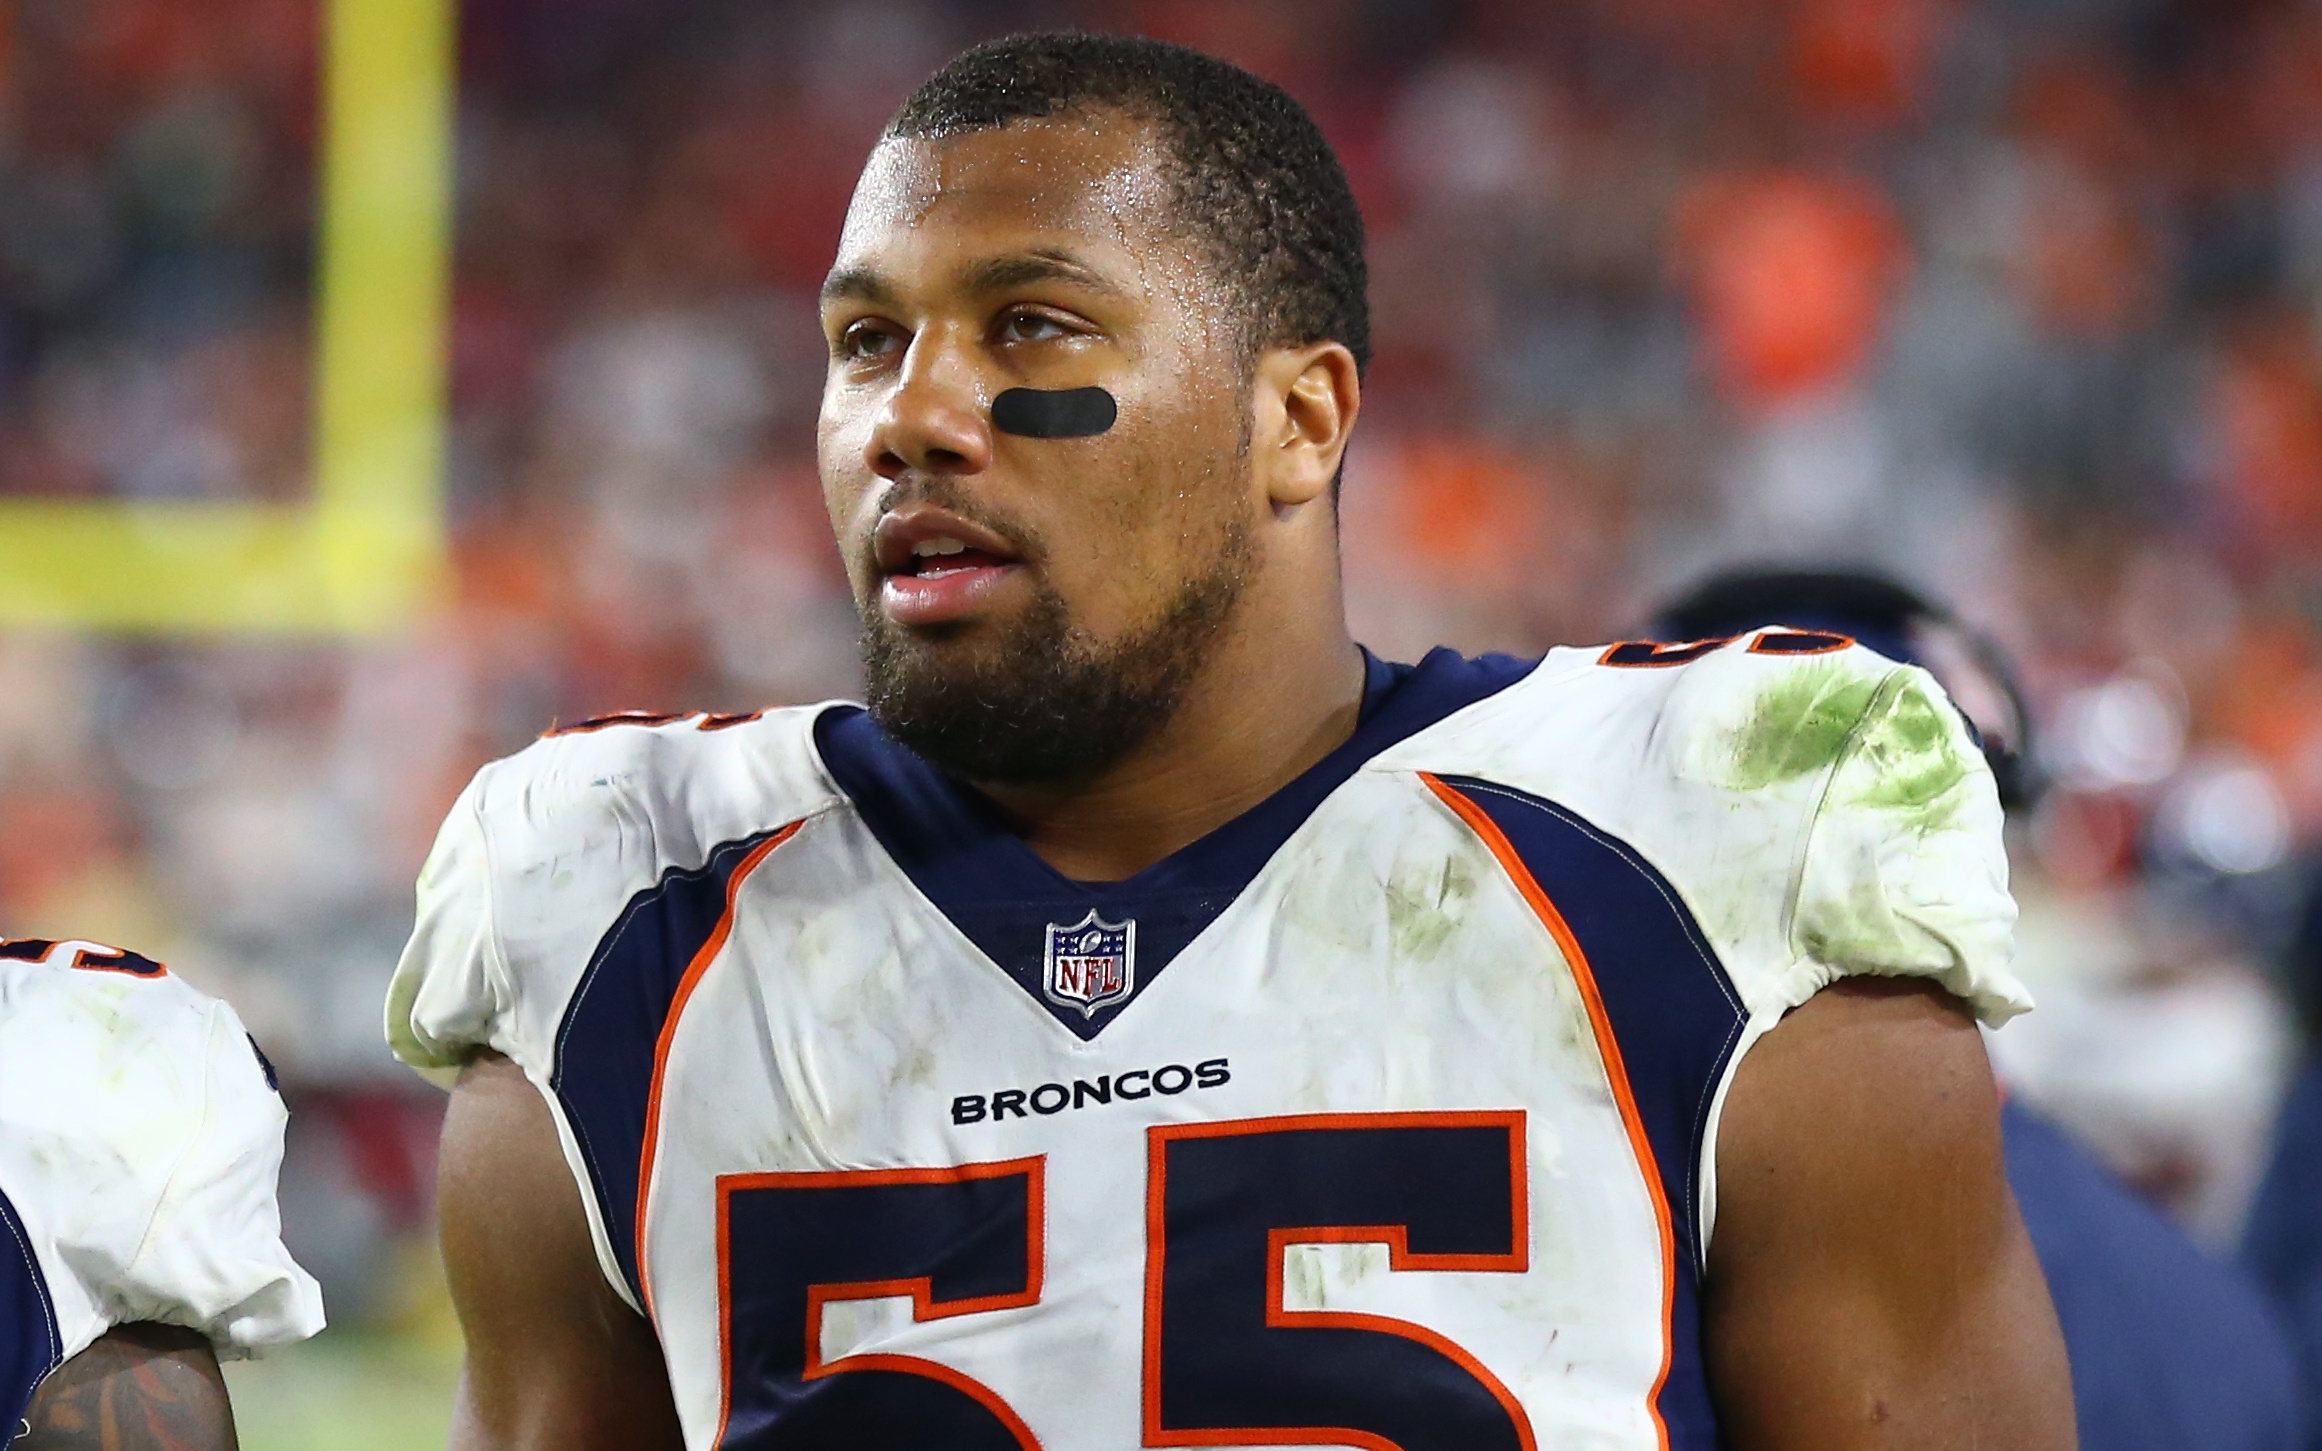 Bradley Chubb, on facing cousin Nick Chubb, 'I’m not going to hold back'